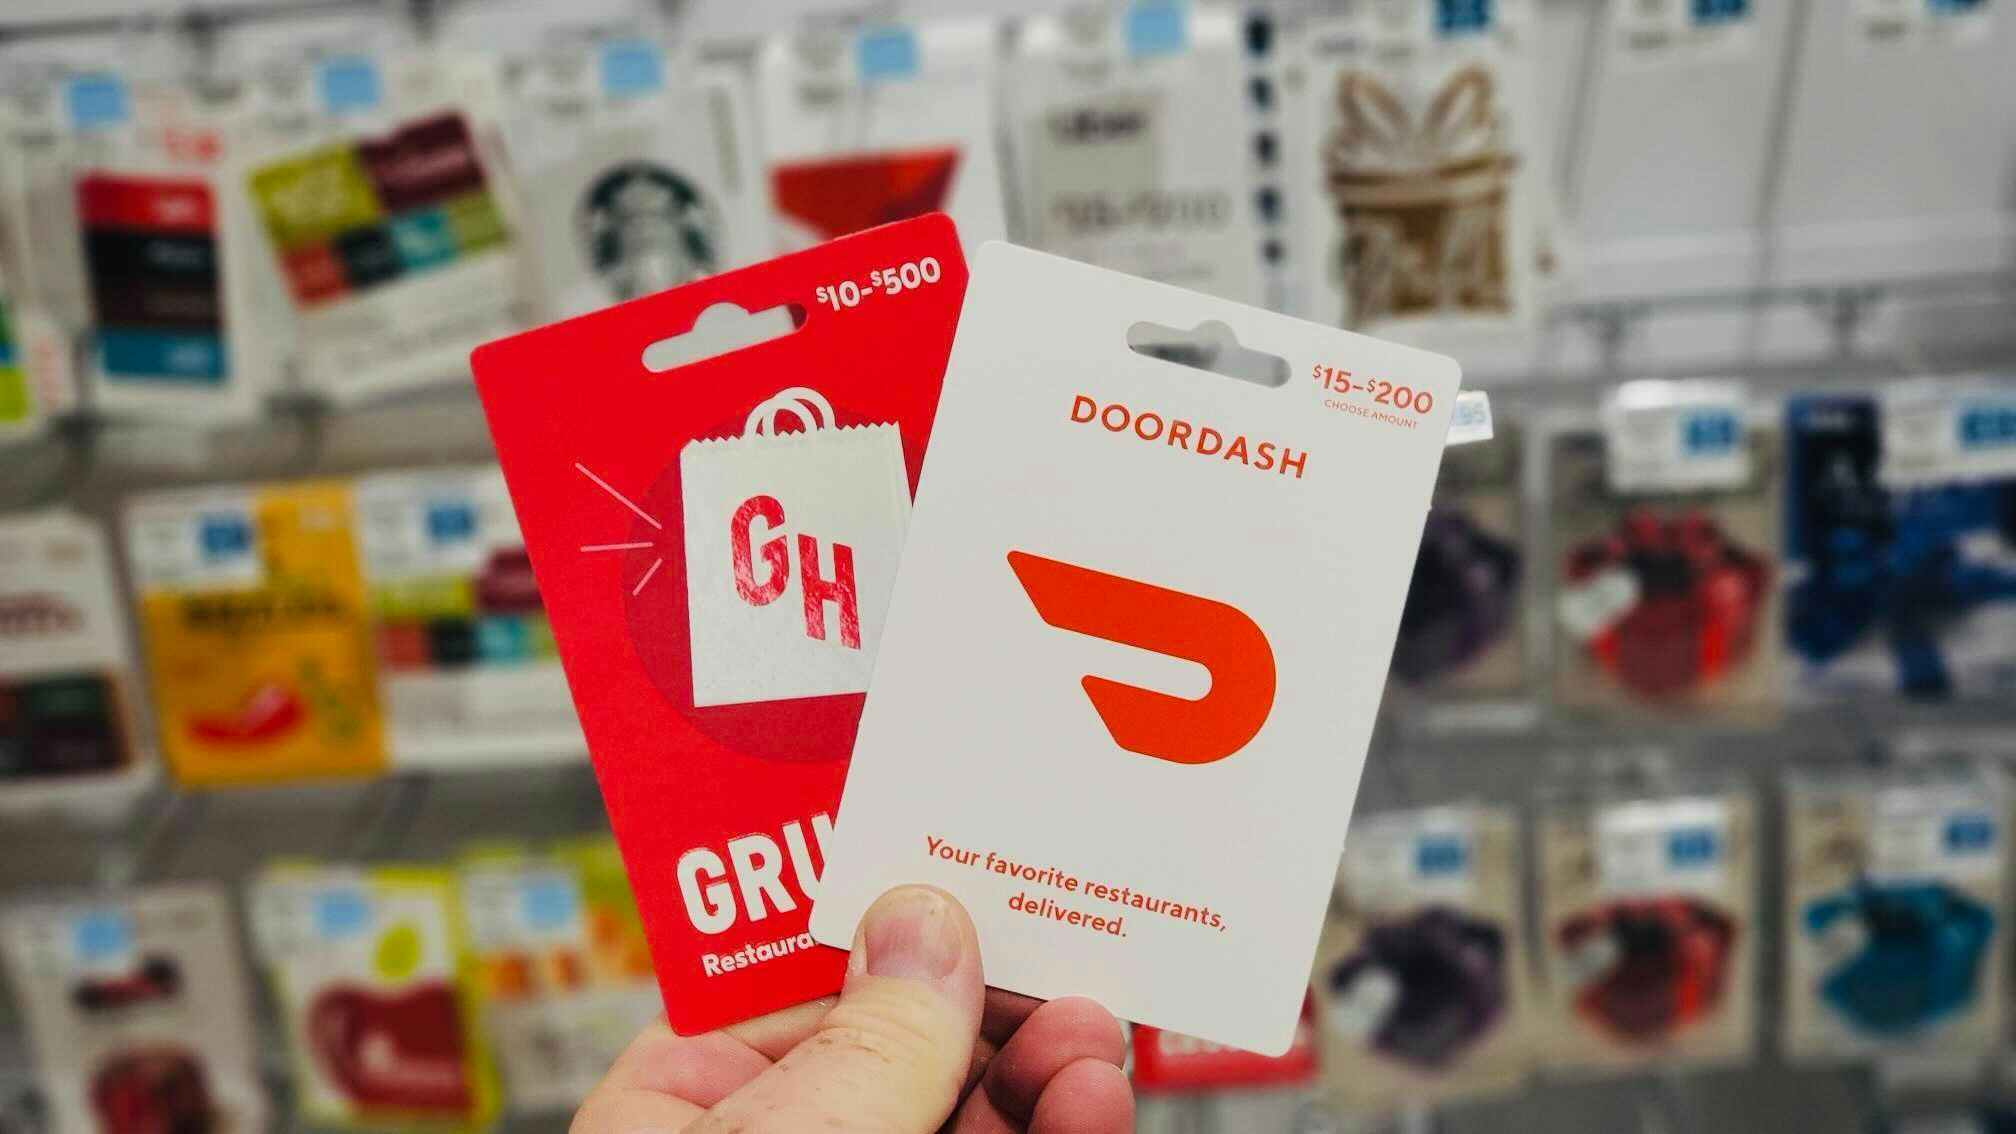 - Two gift cards being held center-frame in front of a wall of gift cards, one is for Grubhub and one for Doordash.